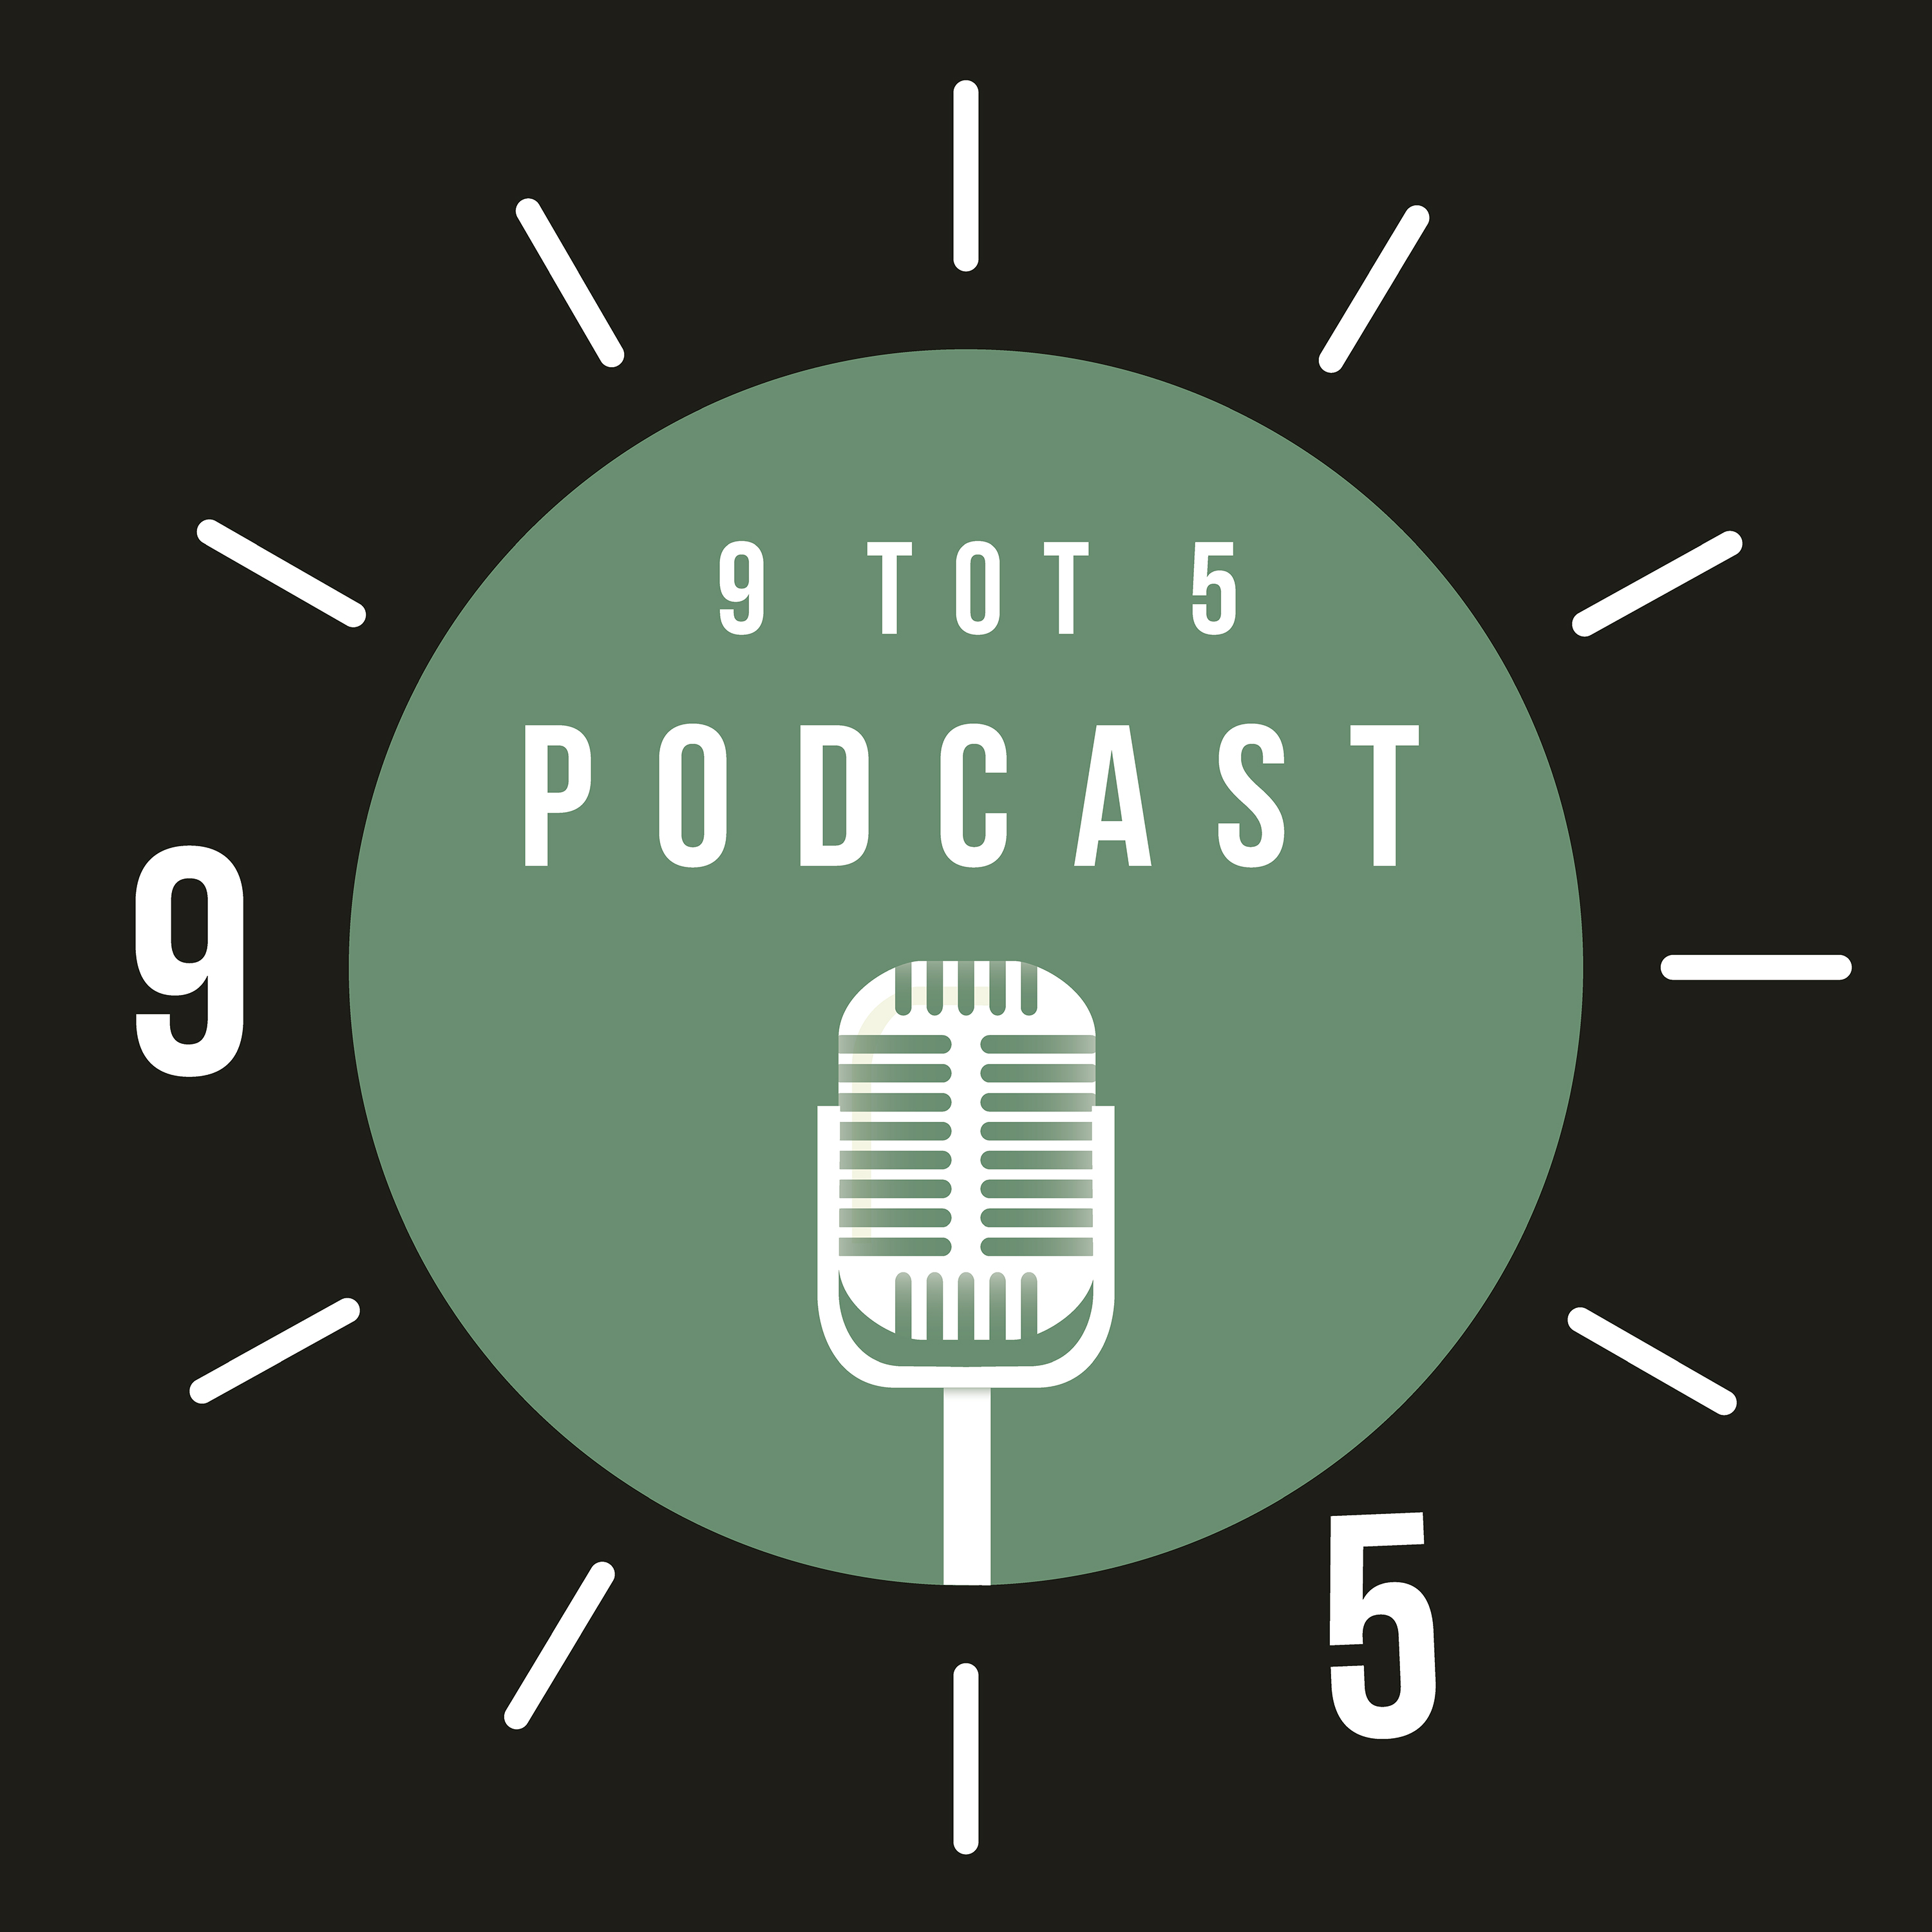 9 tot 5 Podcast